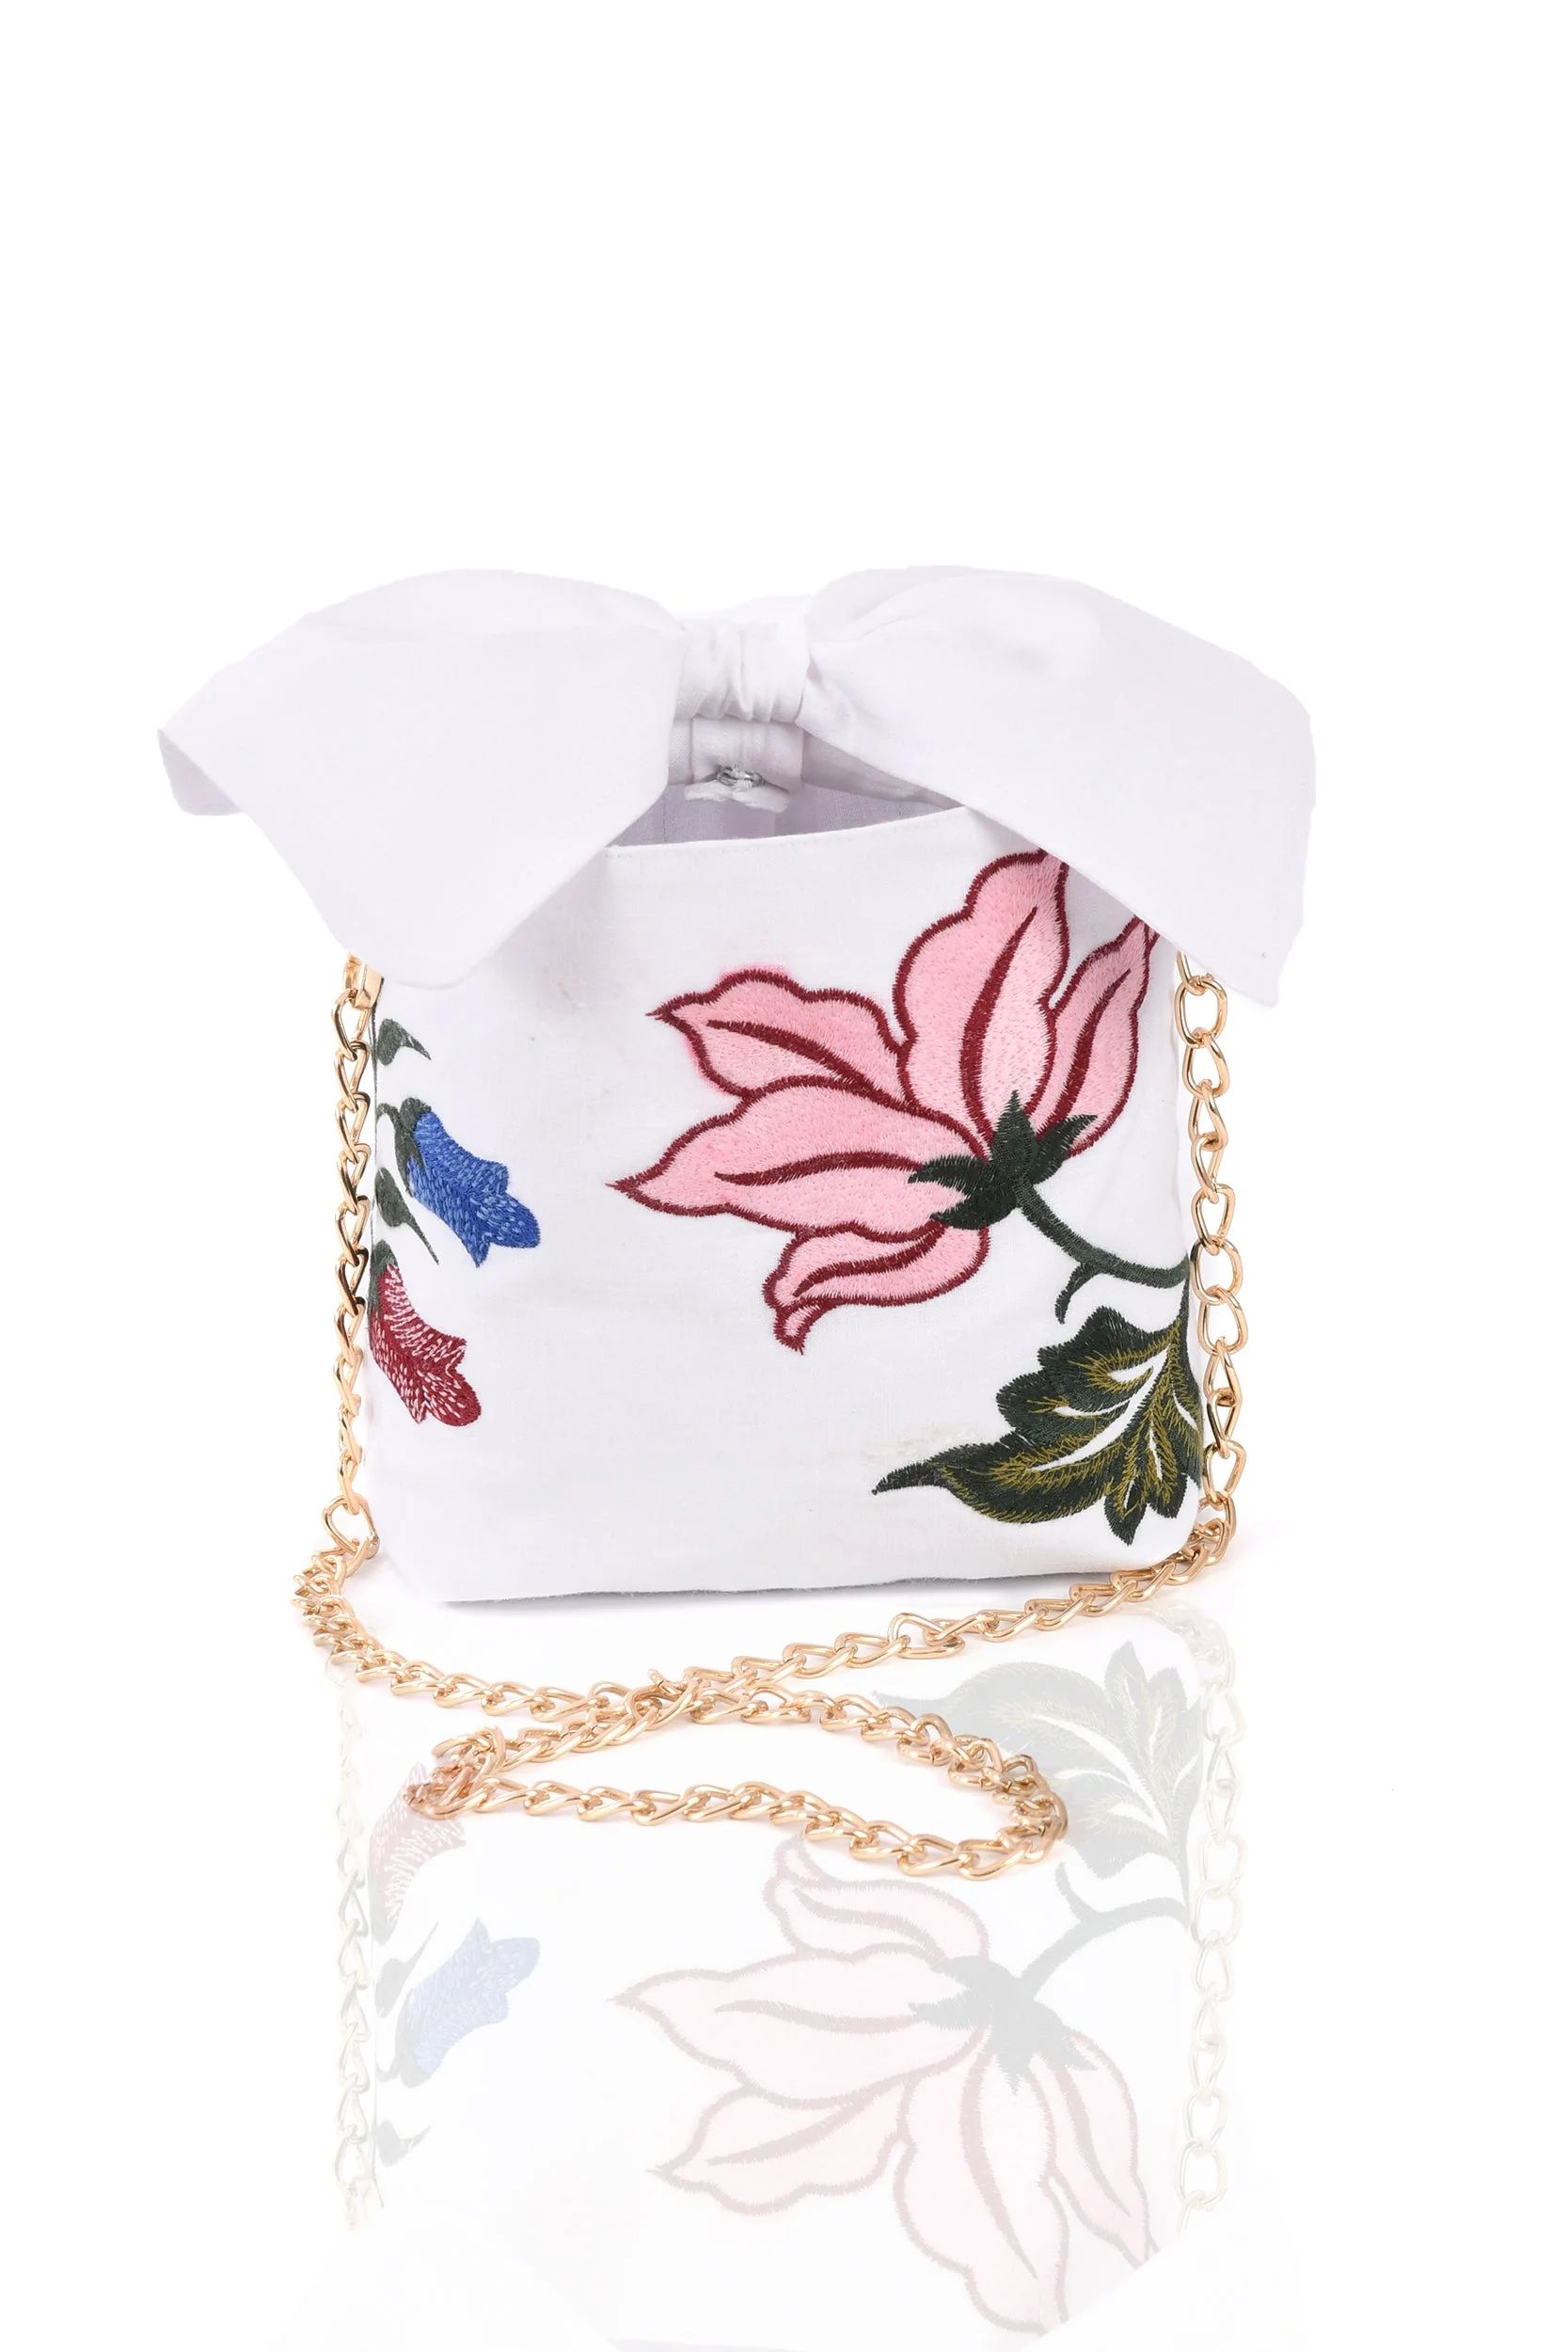 POUCHETTE White (Pre-Order) by Fanm Mon | Support HerStory